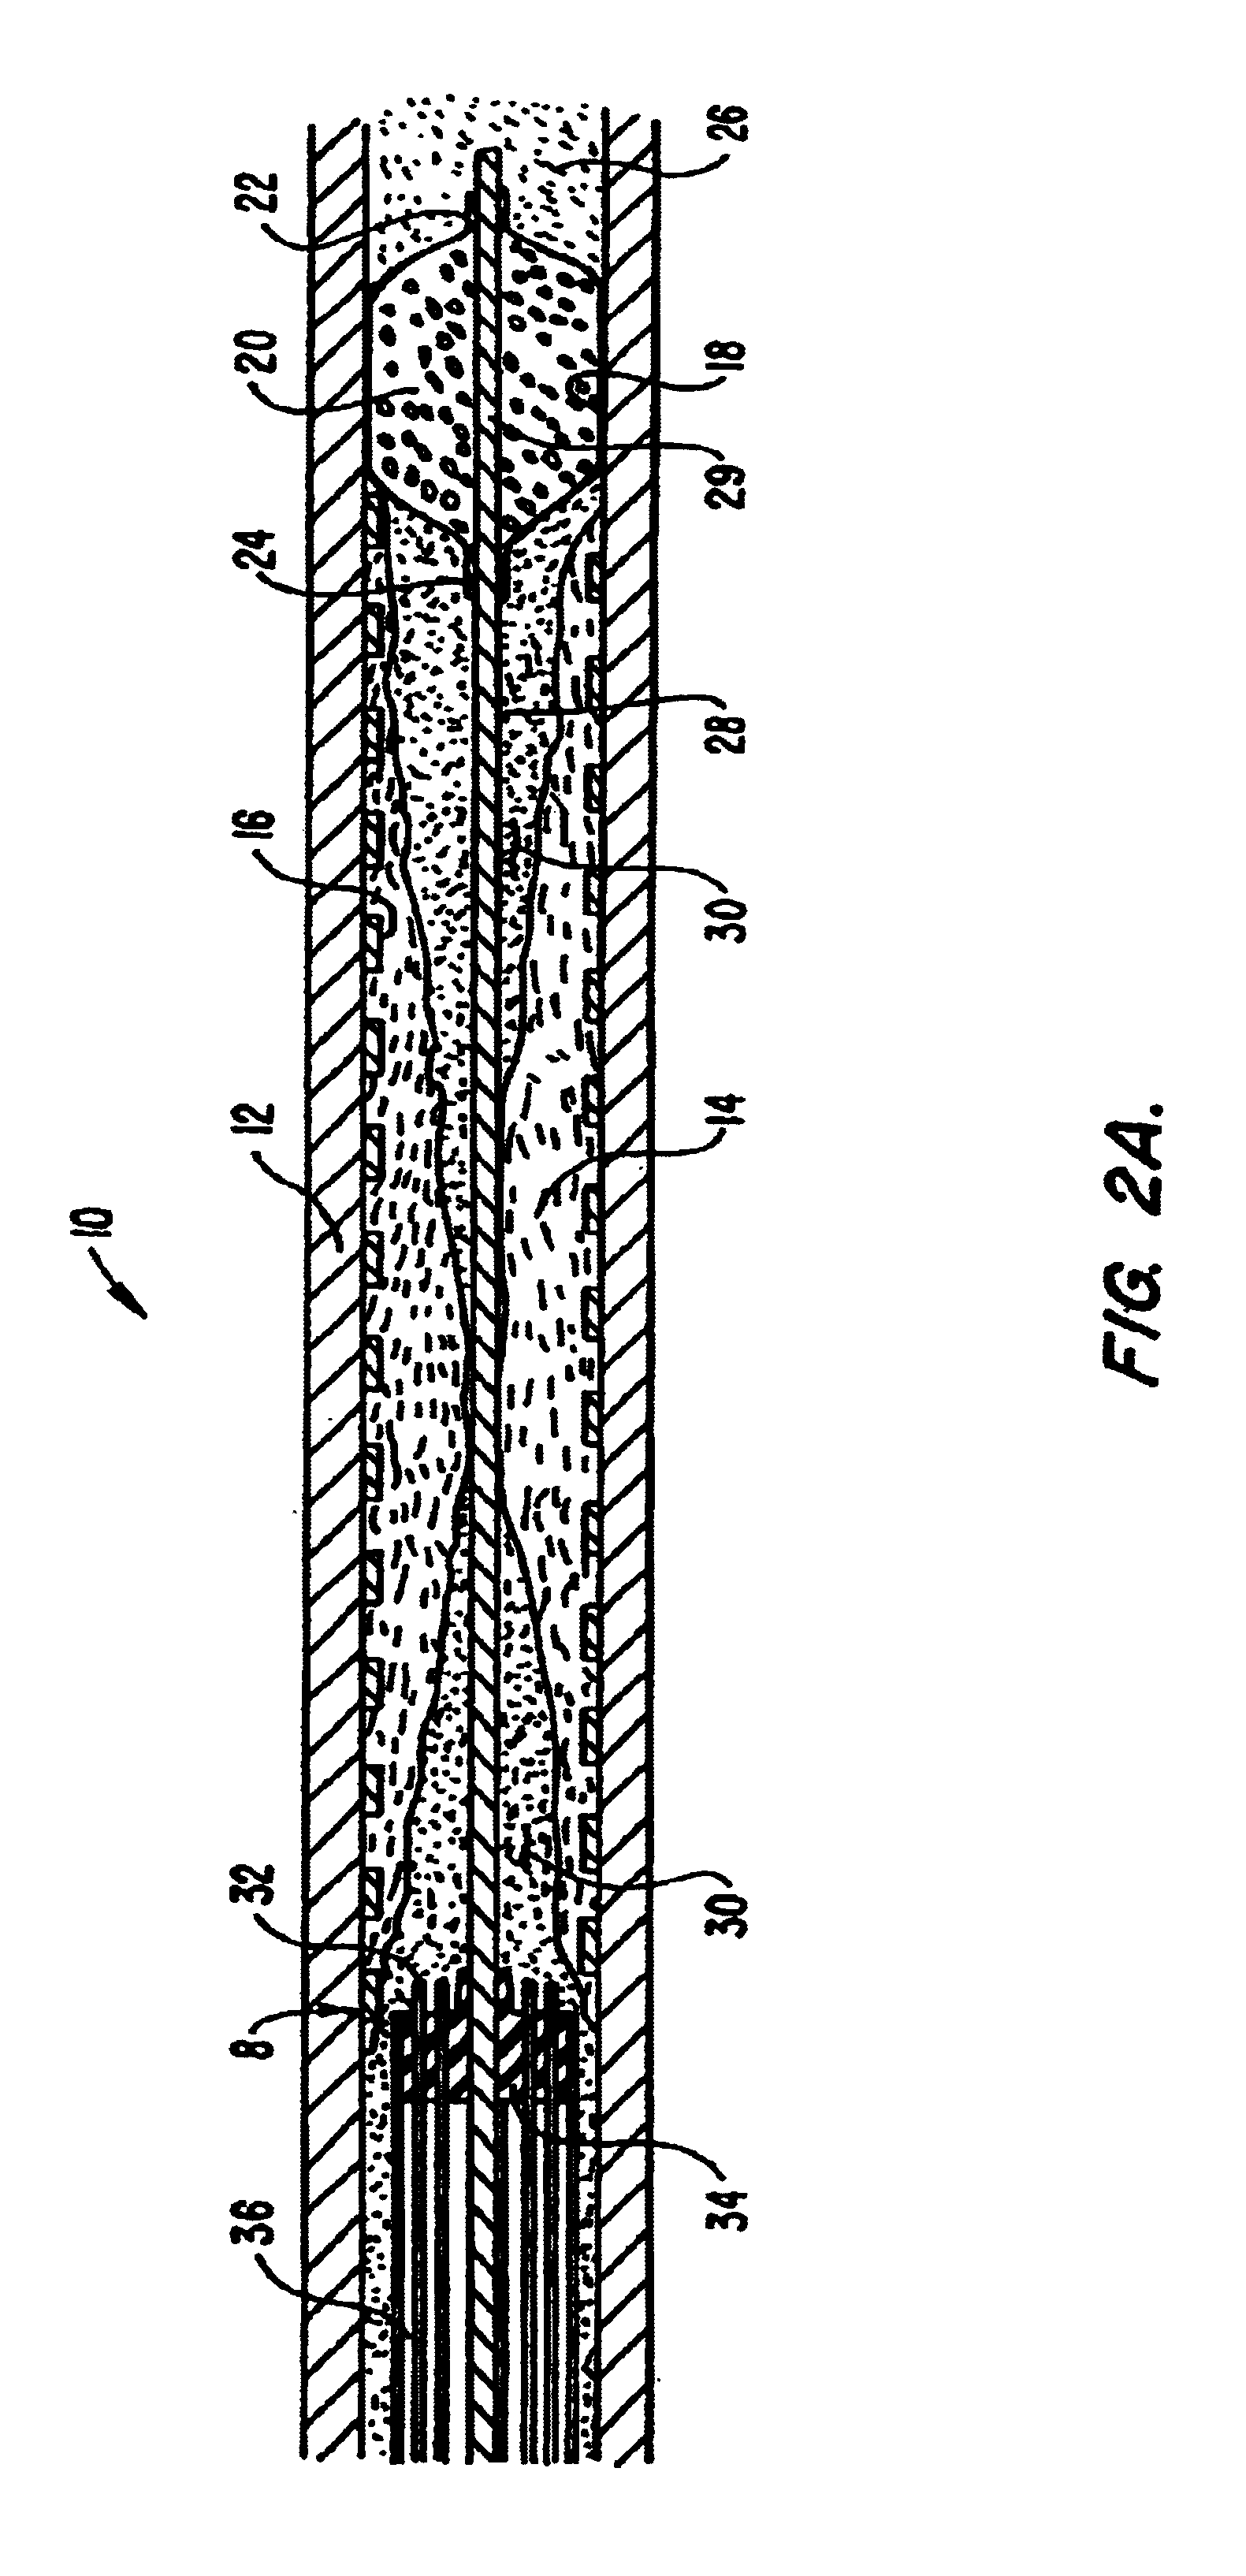 Electrosurgical systems and methods for recanalization of occluded body lumens